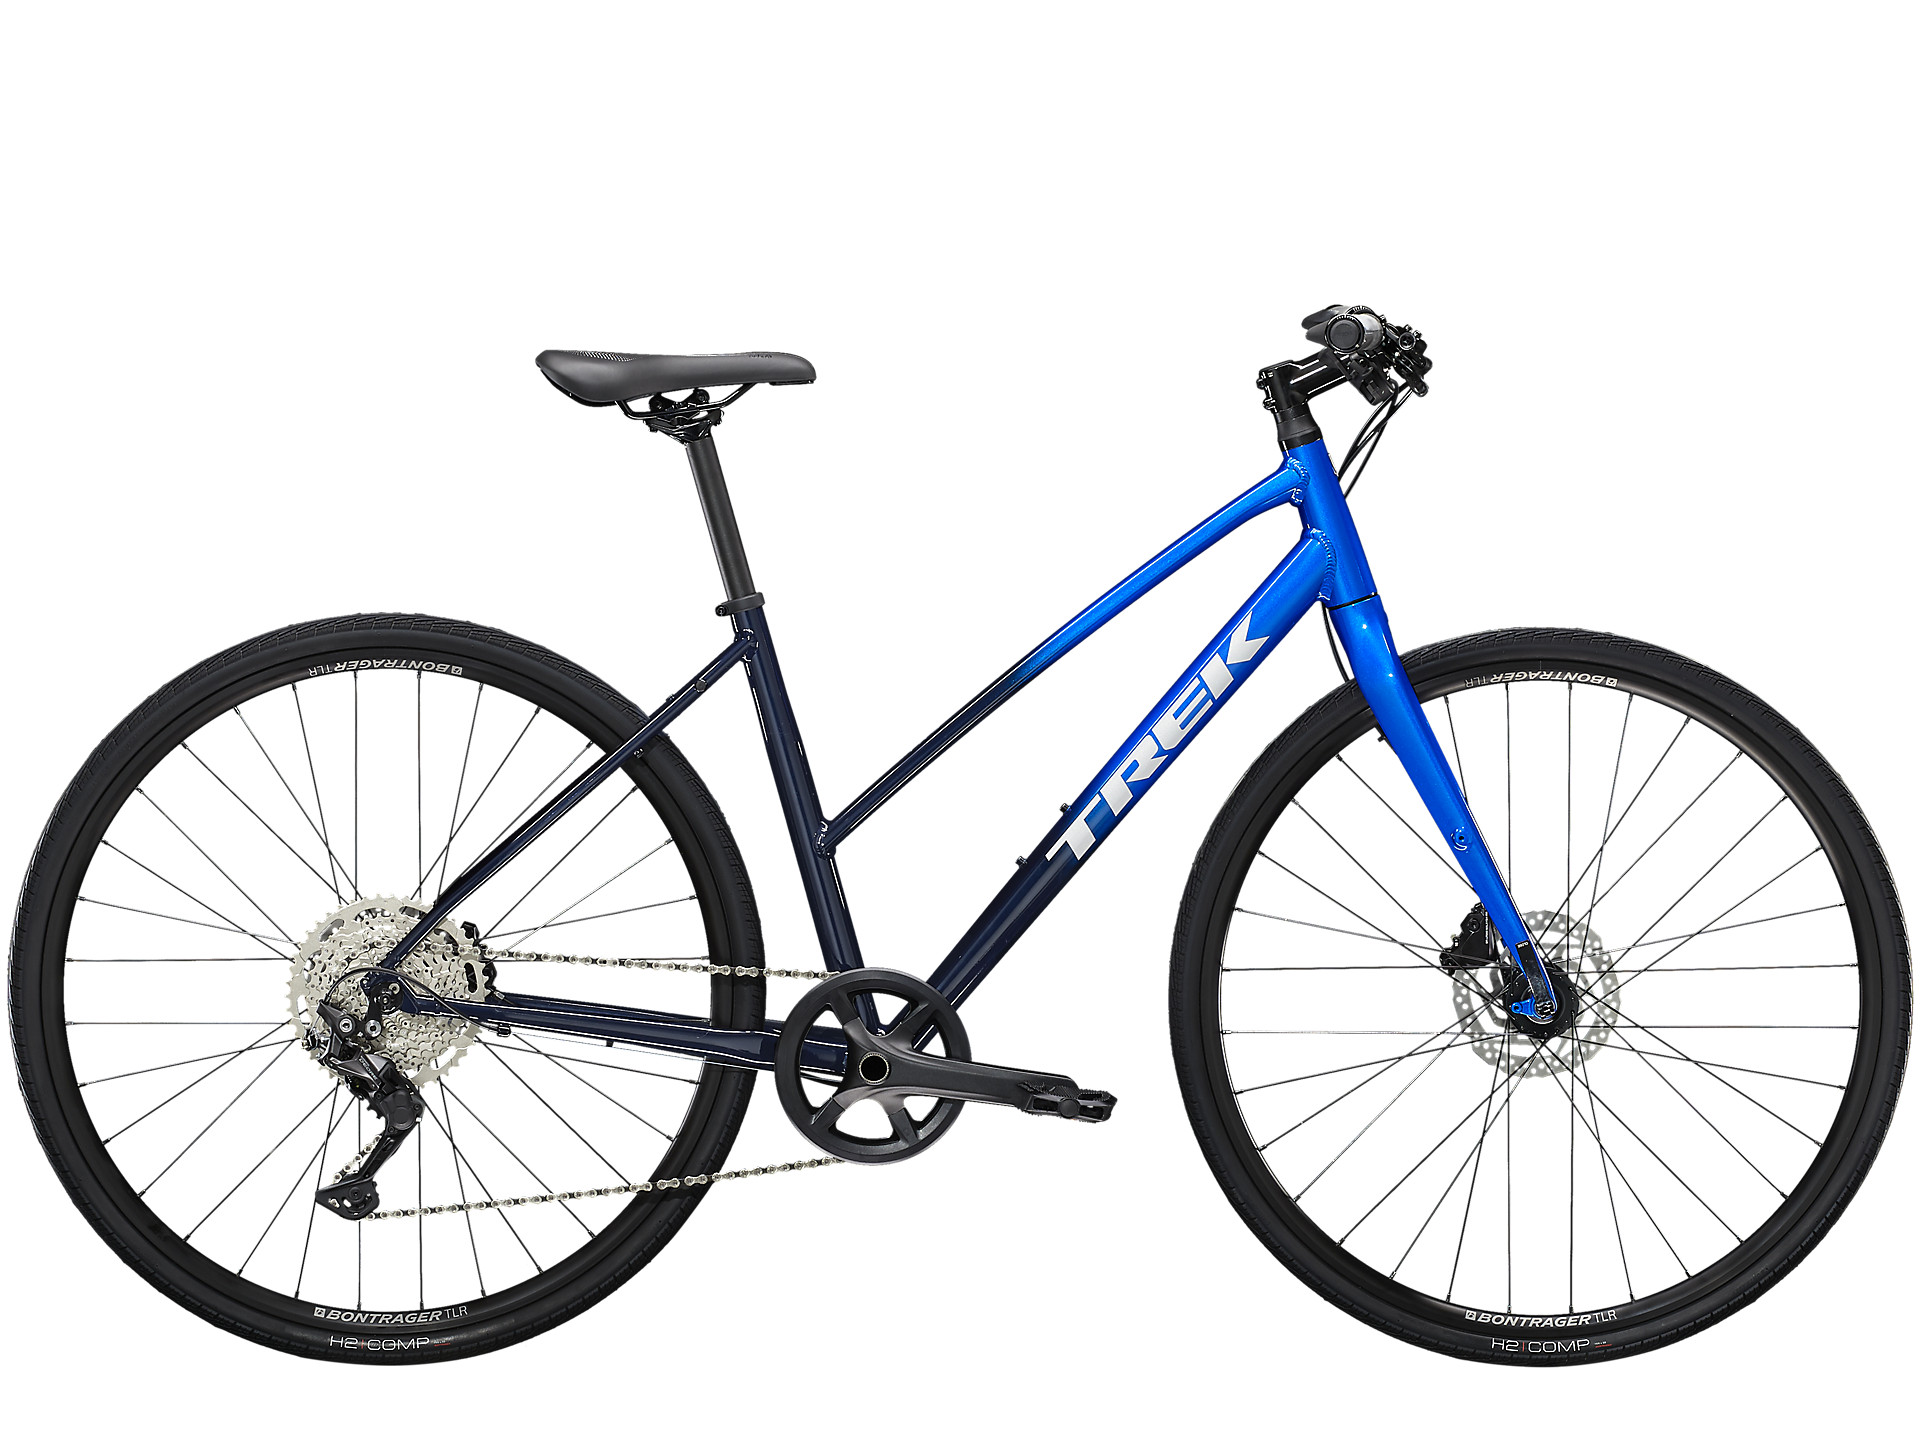 Blue Trek FX 3 Disc Step Through hybrid bike with disc brakes that can be used as a gravel bike.